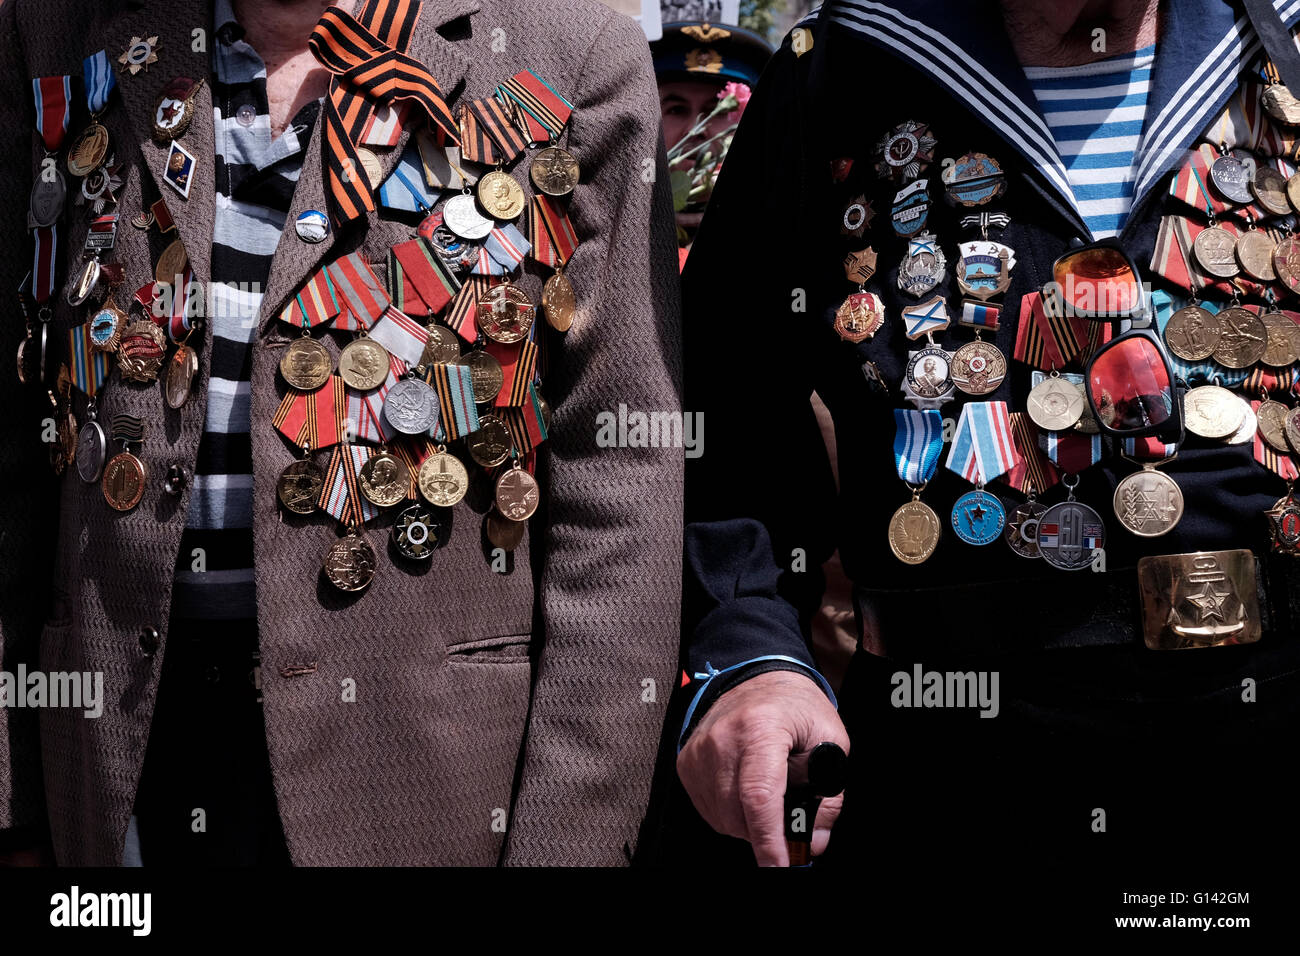 Soviet Jewish World War II veterans with medals pinned in their old uniforms during ceremony marking the Allied Victory over Nazi Germany in Israel Stock Photo